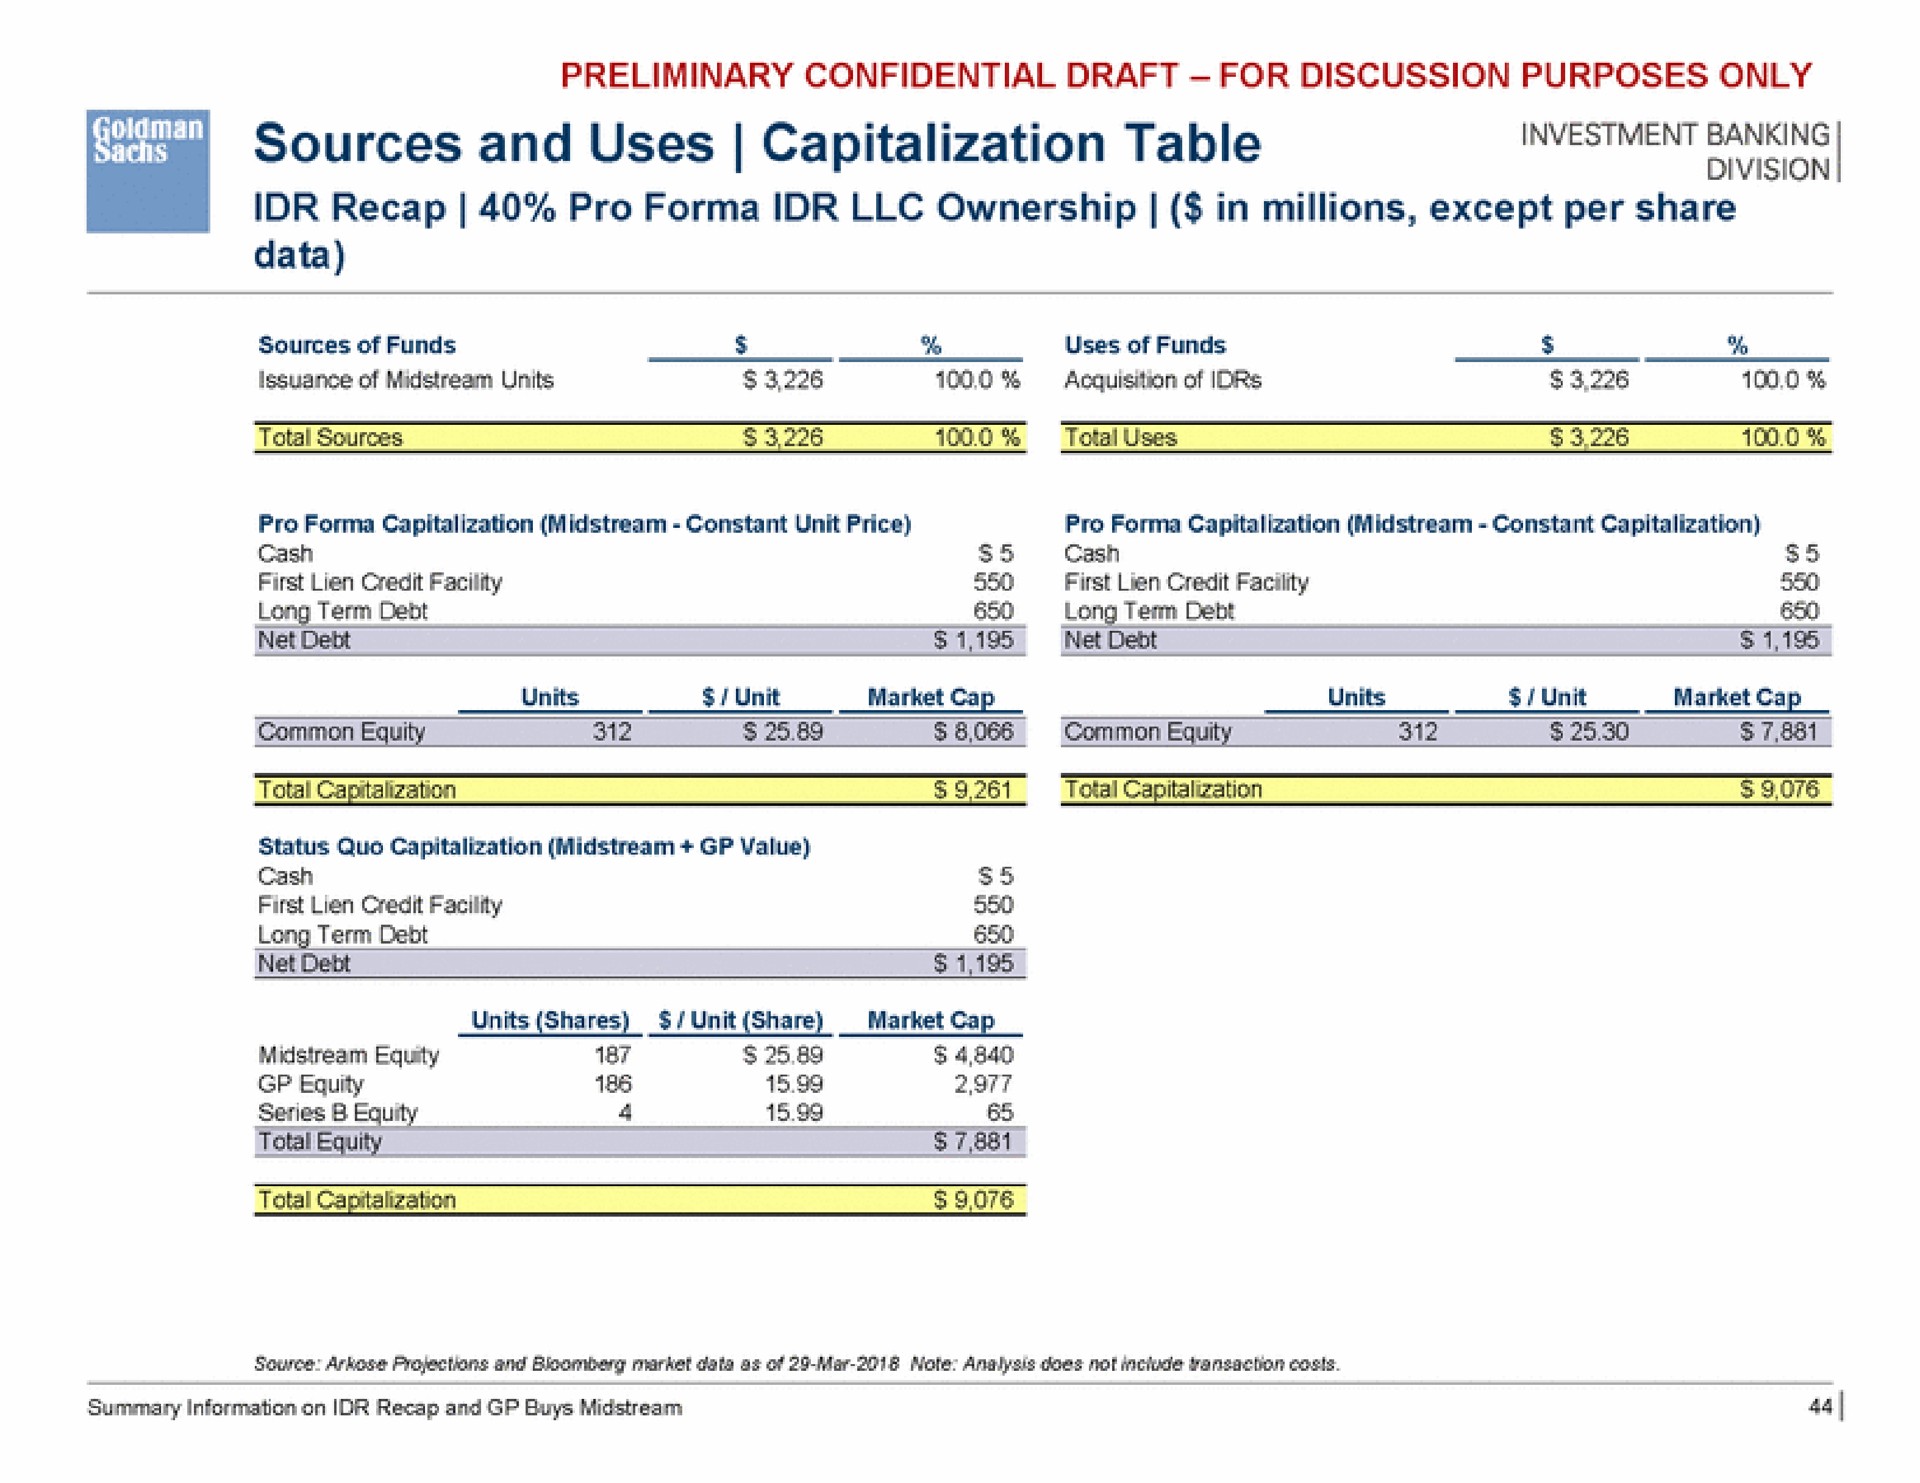 be ean sources and uses capitalization table | Goldman Sachs